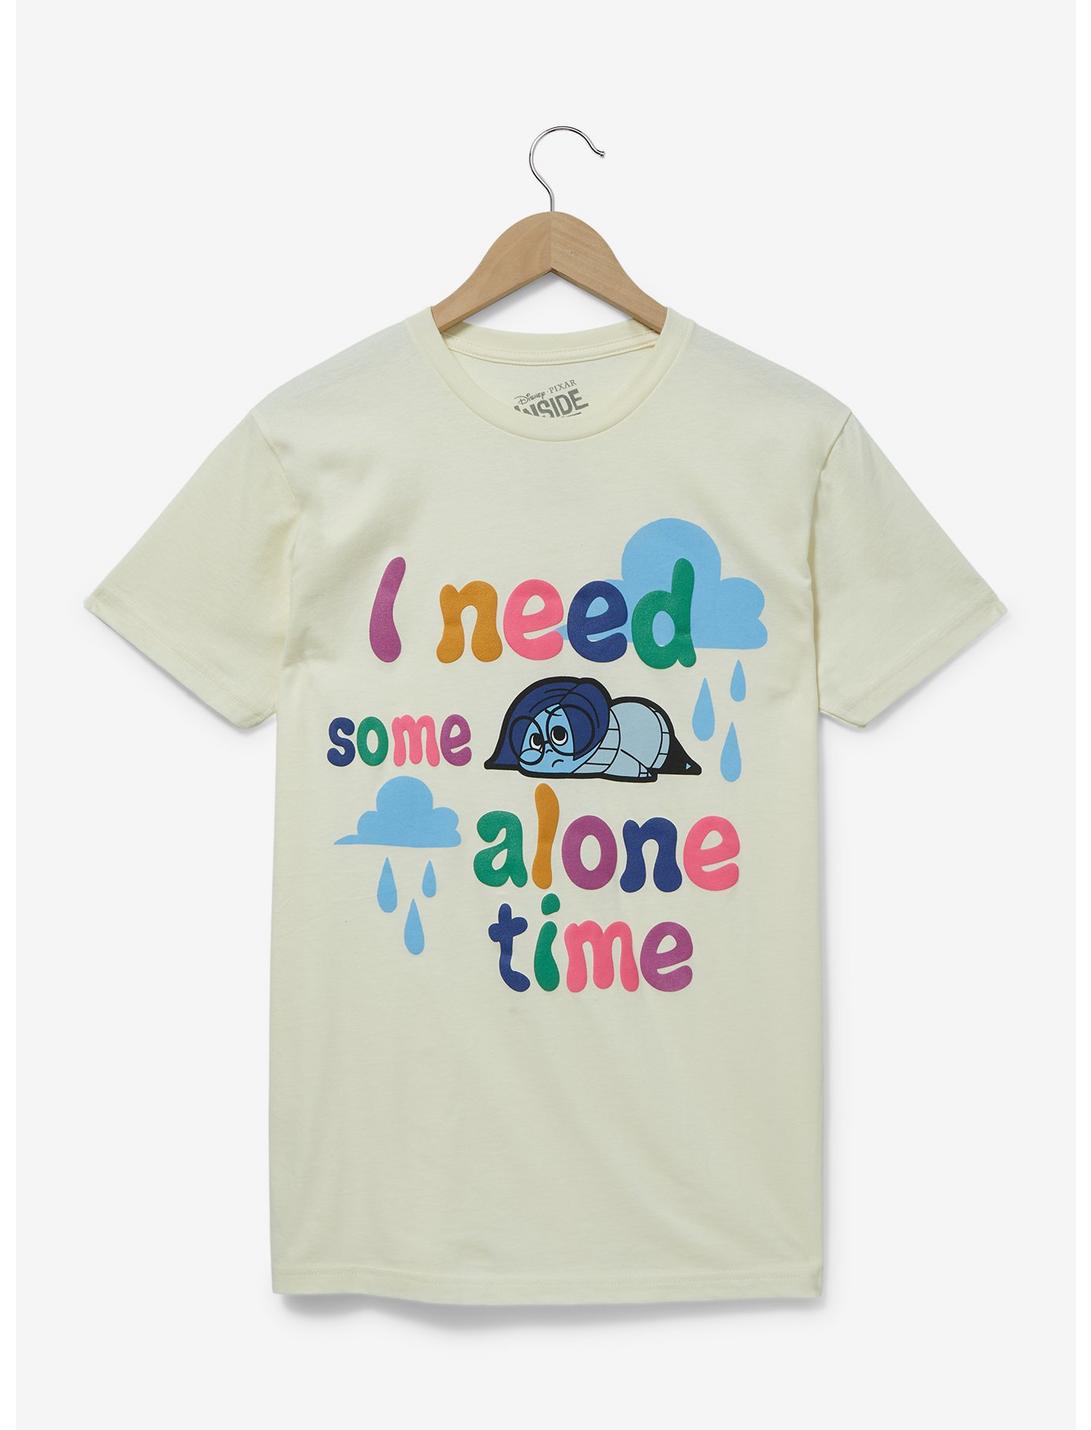 Disney Pixar Inside Out Sadness Alone Time Women's T-Shirt — BoxLunch Exclusive, OFF WHITE, hi-res